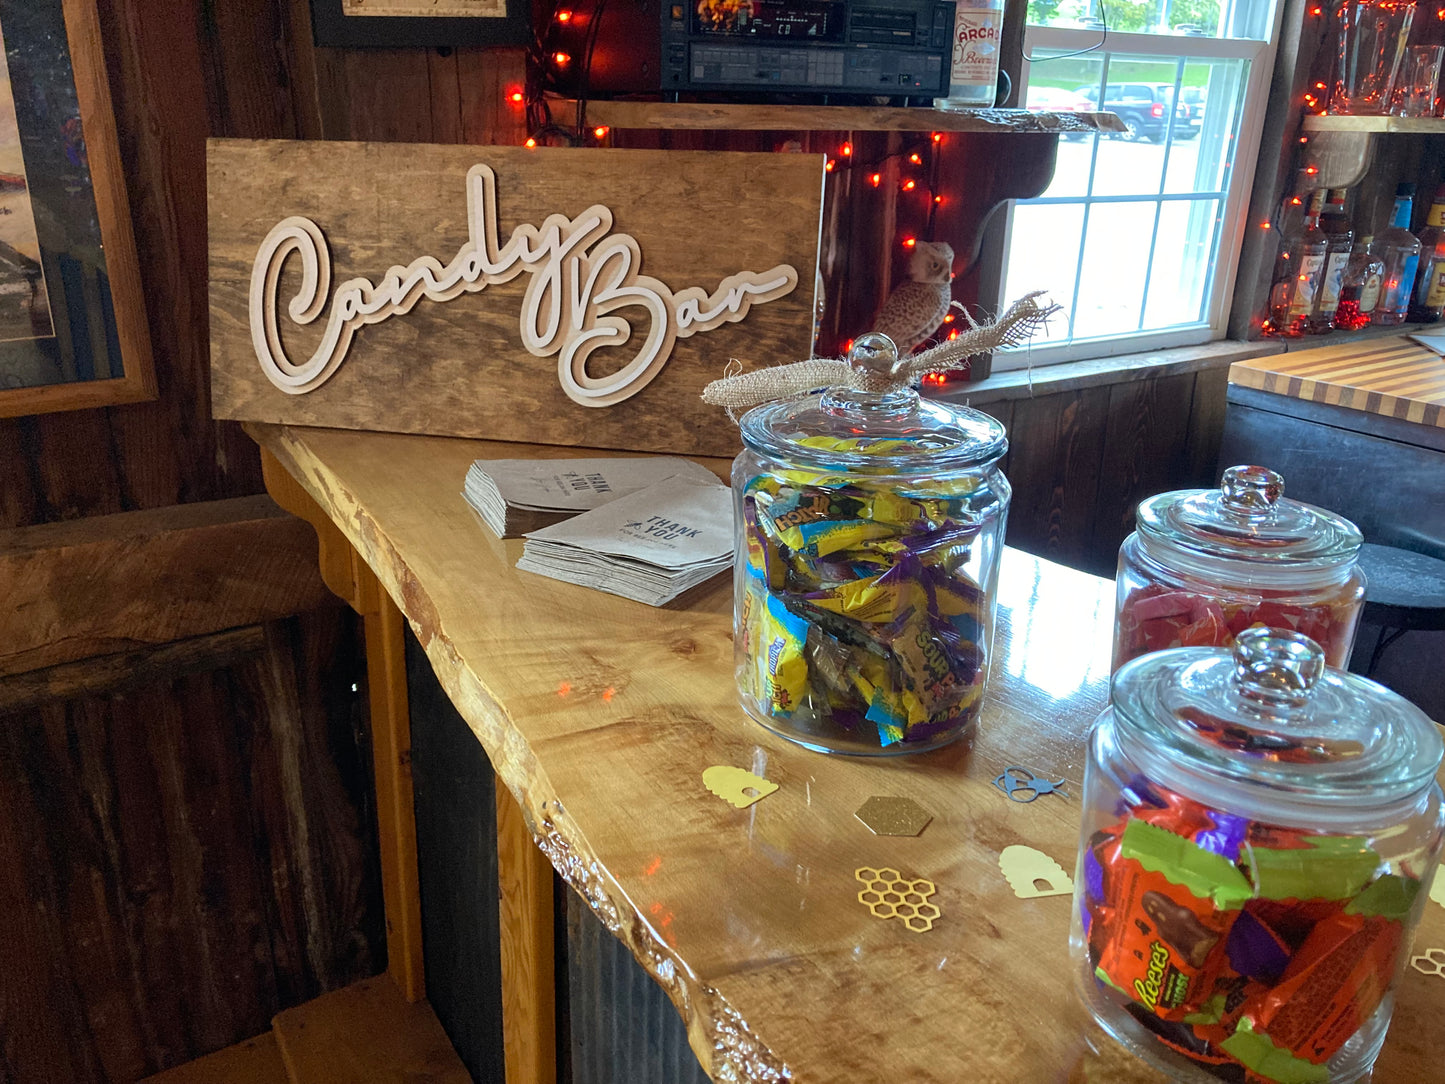 Candy Bar Sign for Candy Station - "Candy Bar"